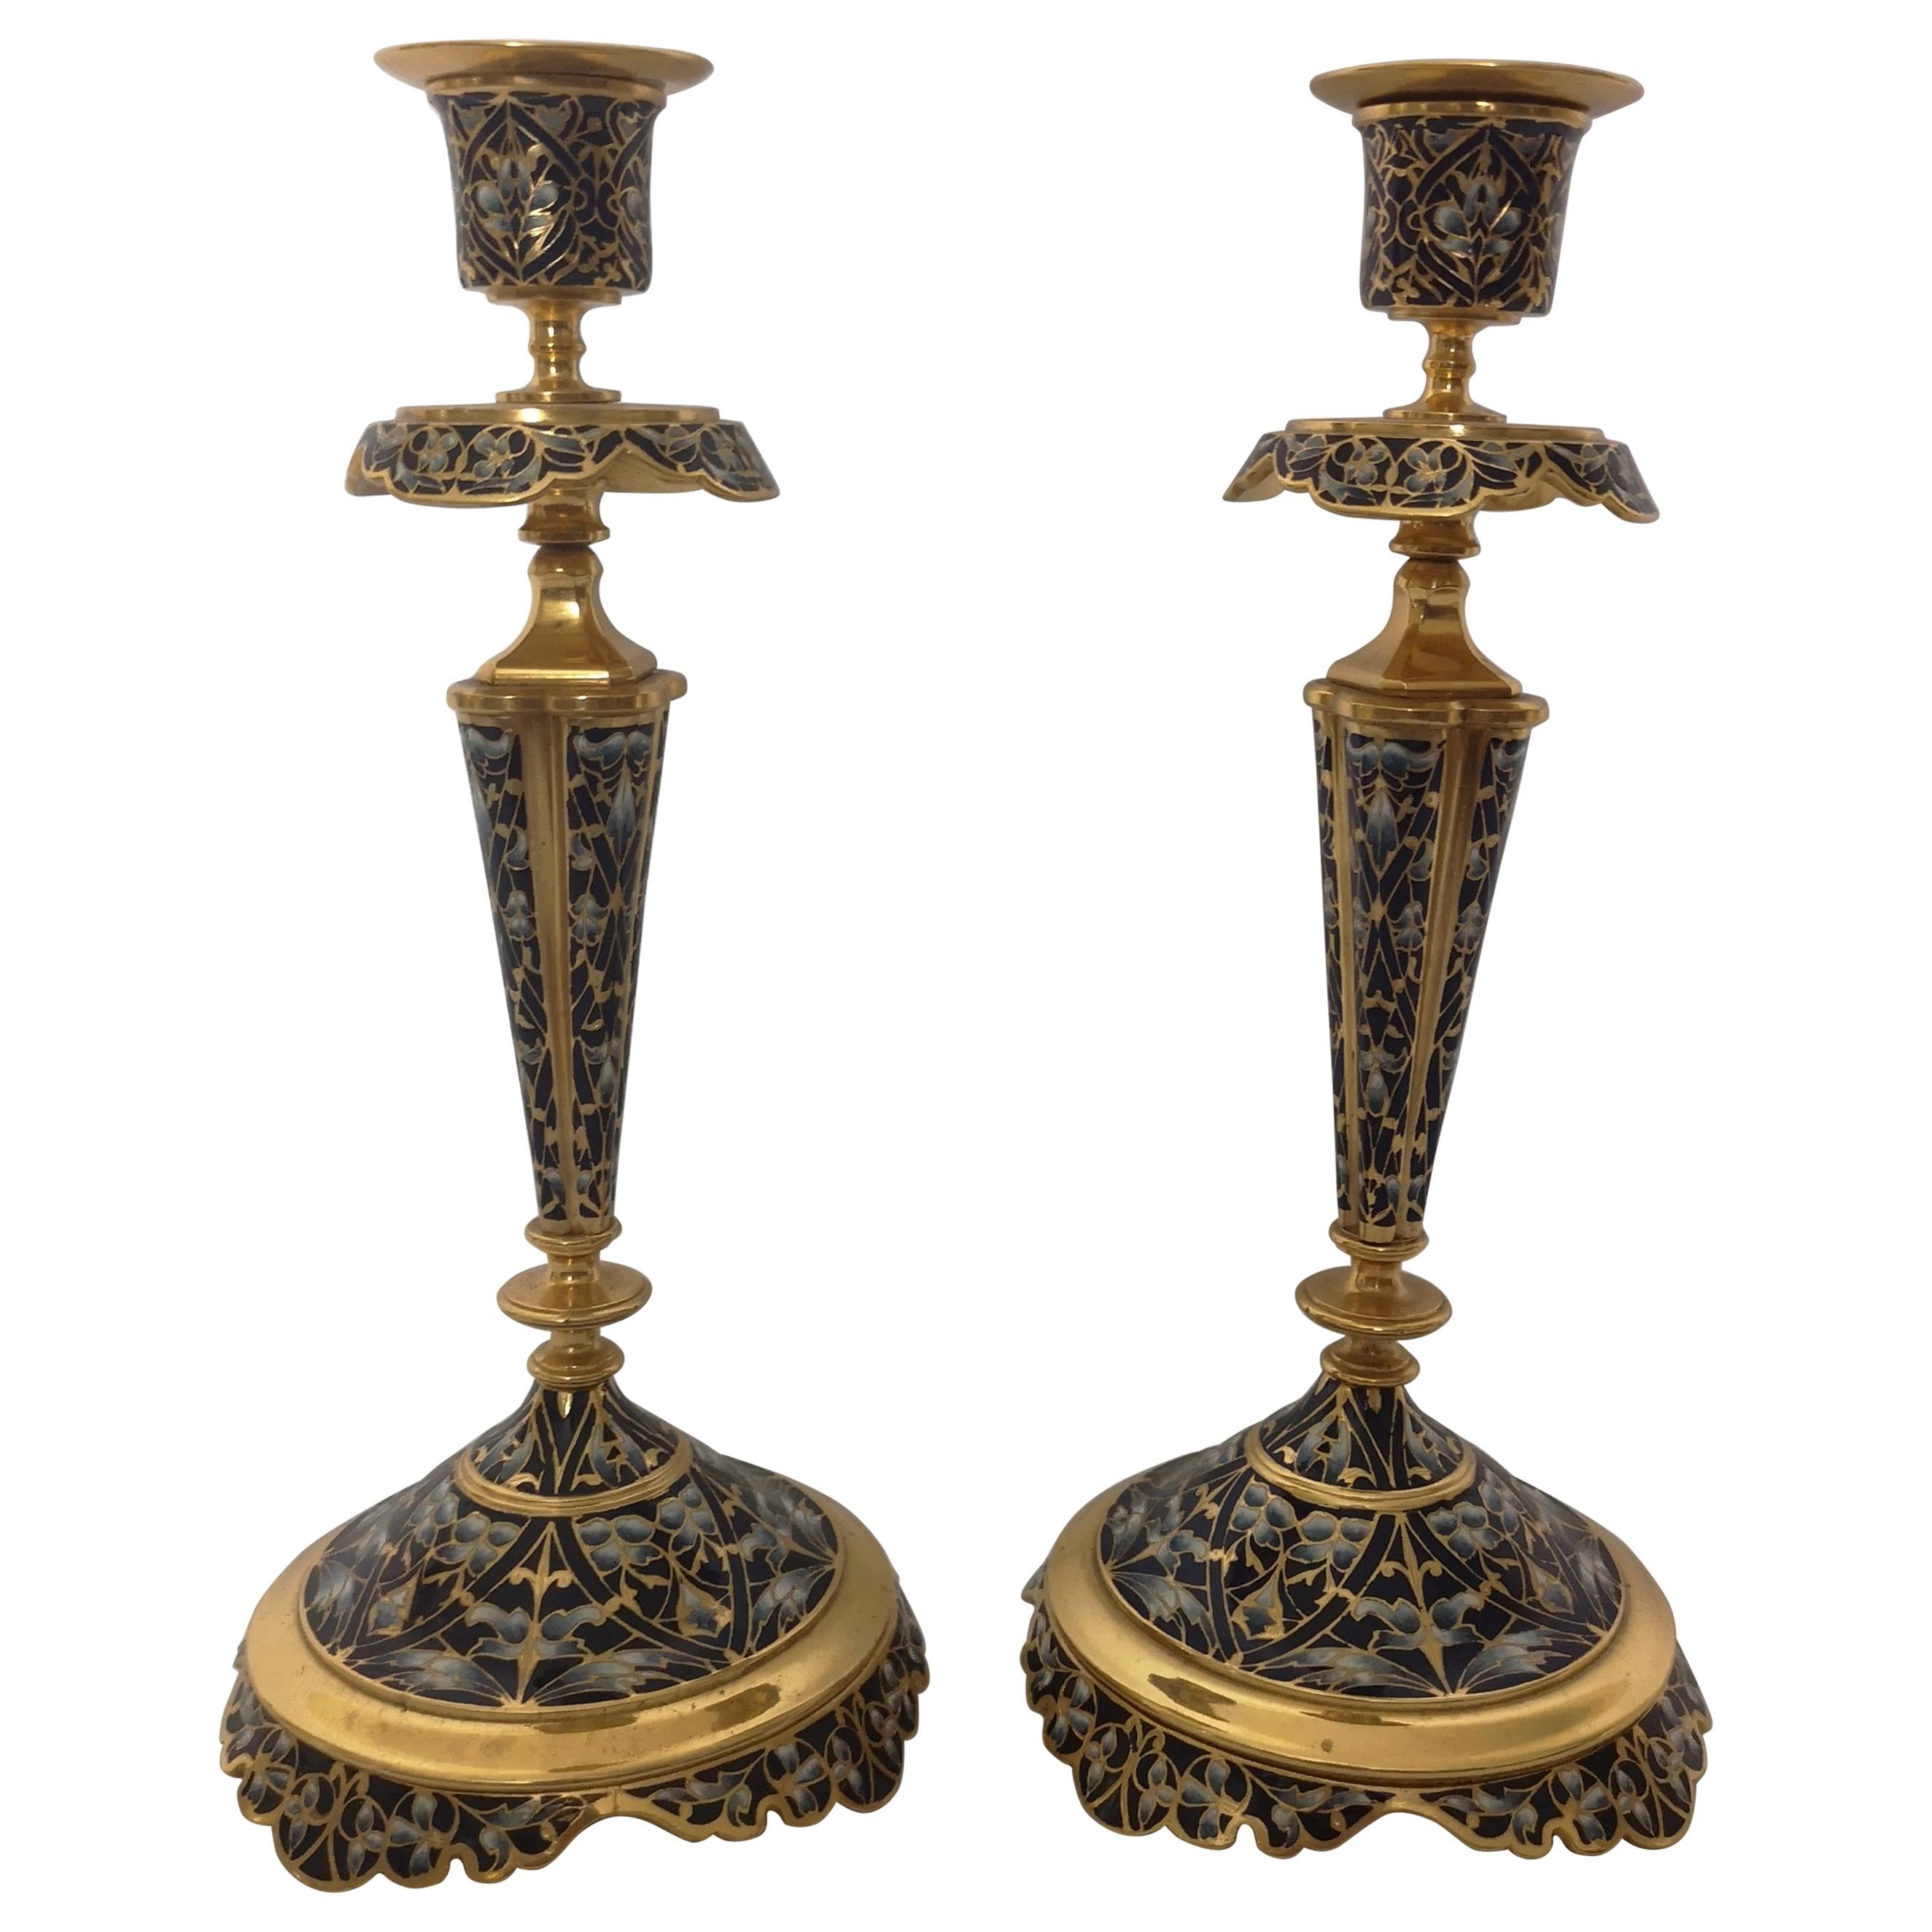 Pair of 19th Century French Champleve Enamel Candlesticks